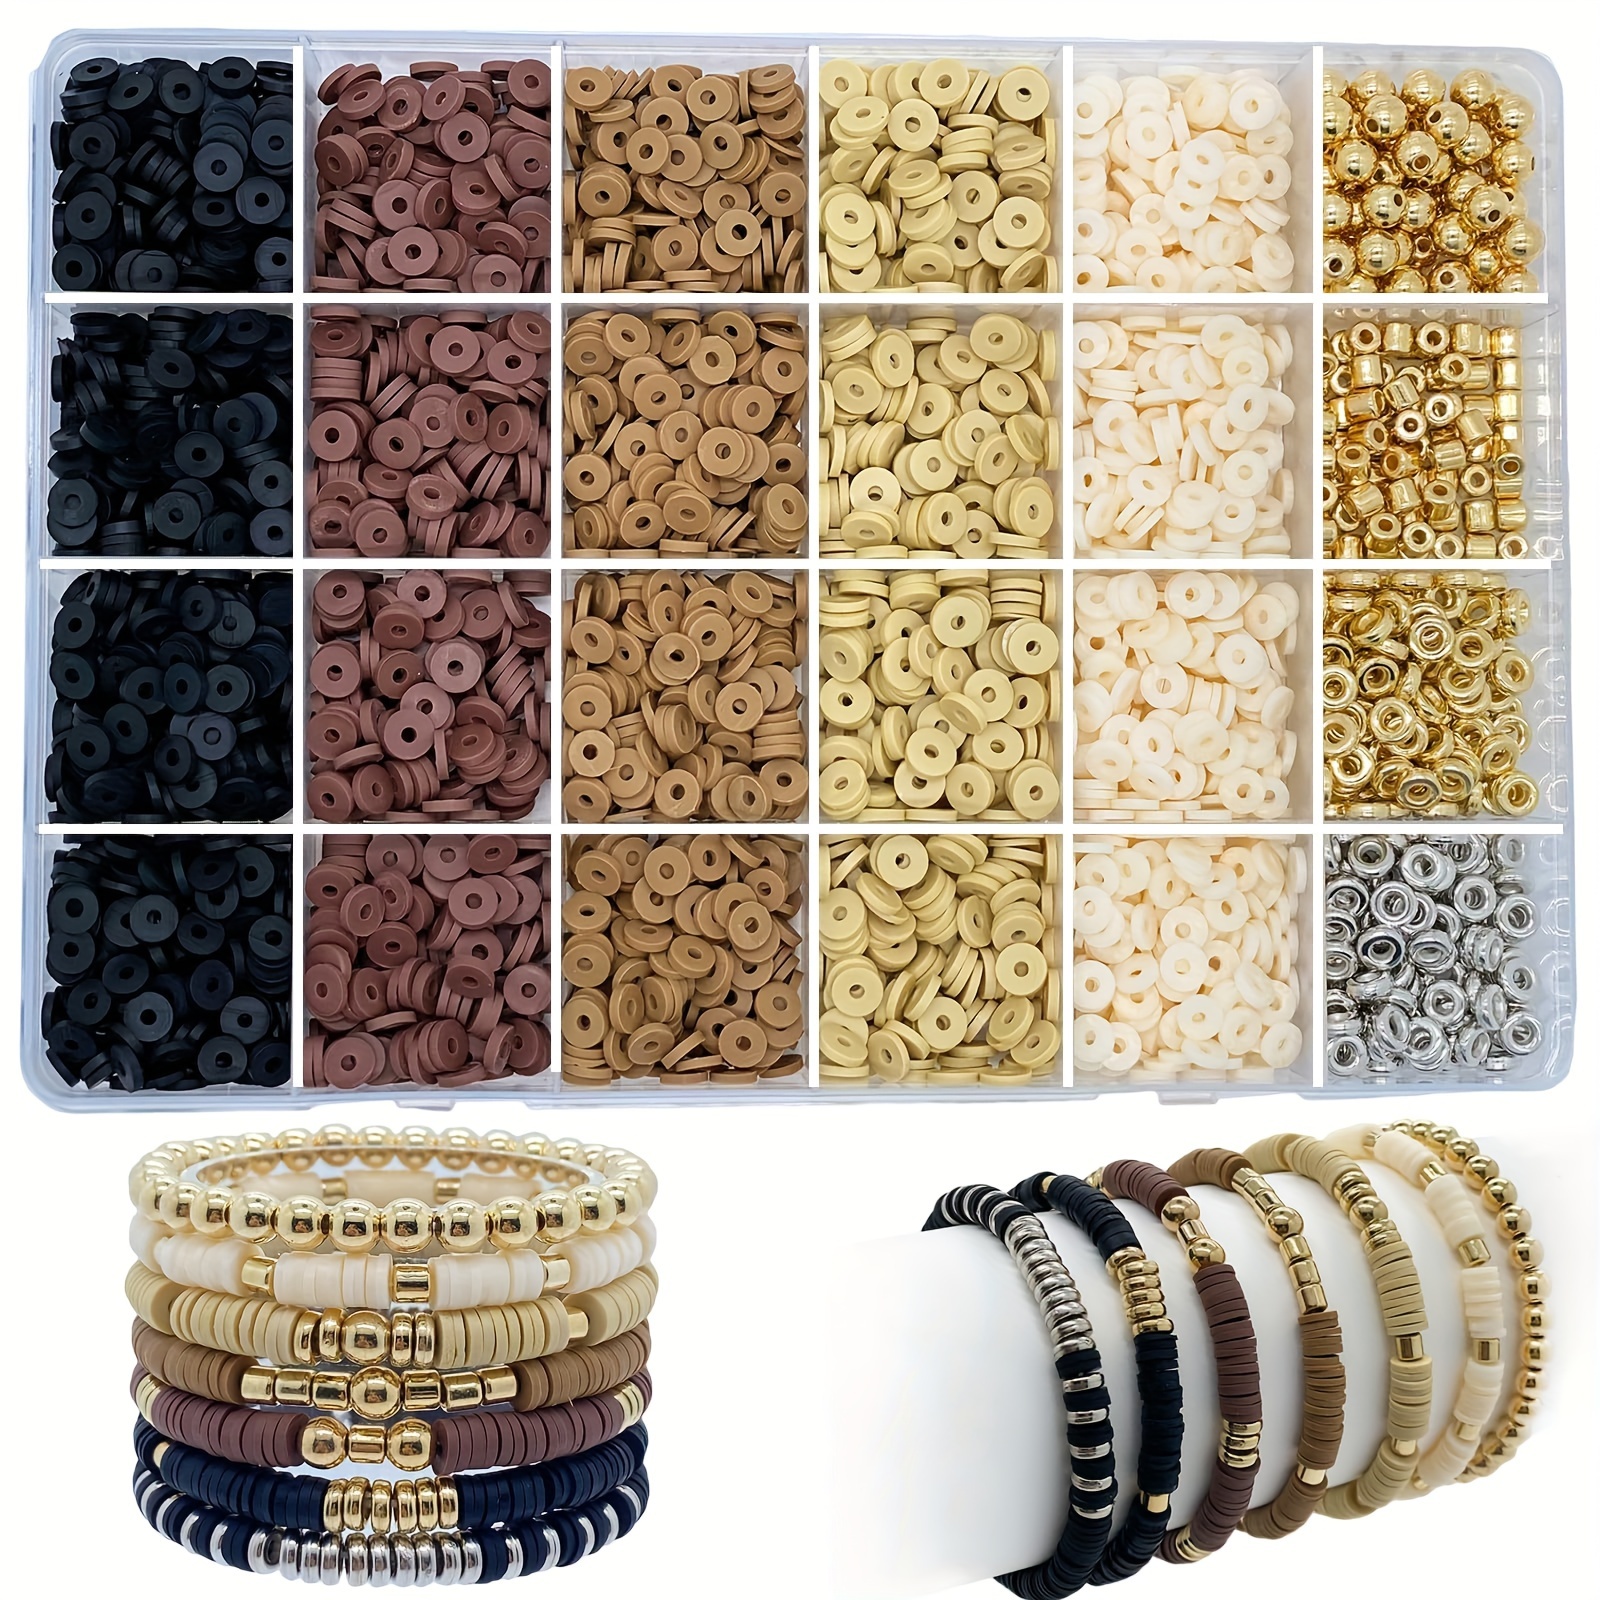 5400pcs Clay Beads For Bracelet Making Kit 48 Colors Flat Round Polymer  Clay Spacer Heishi Beads For Jewelry Making, For Halloween，Thanksgiving And  Ch